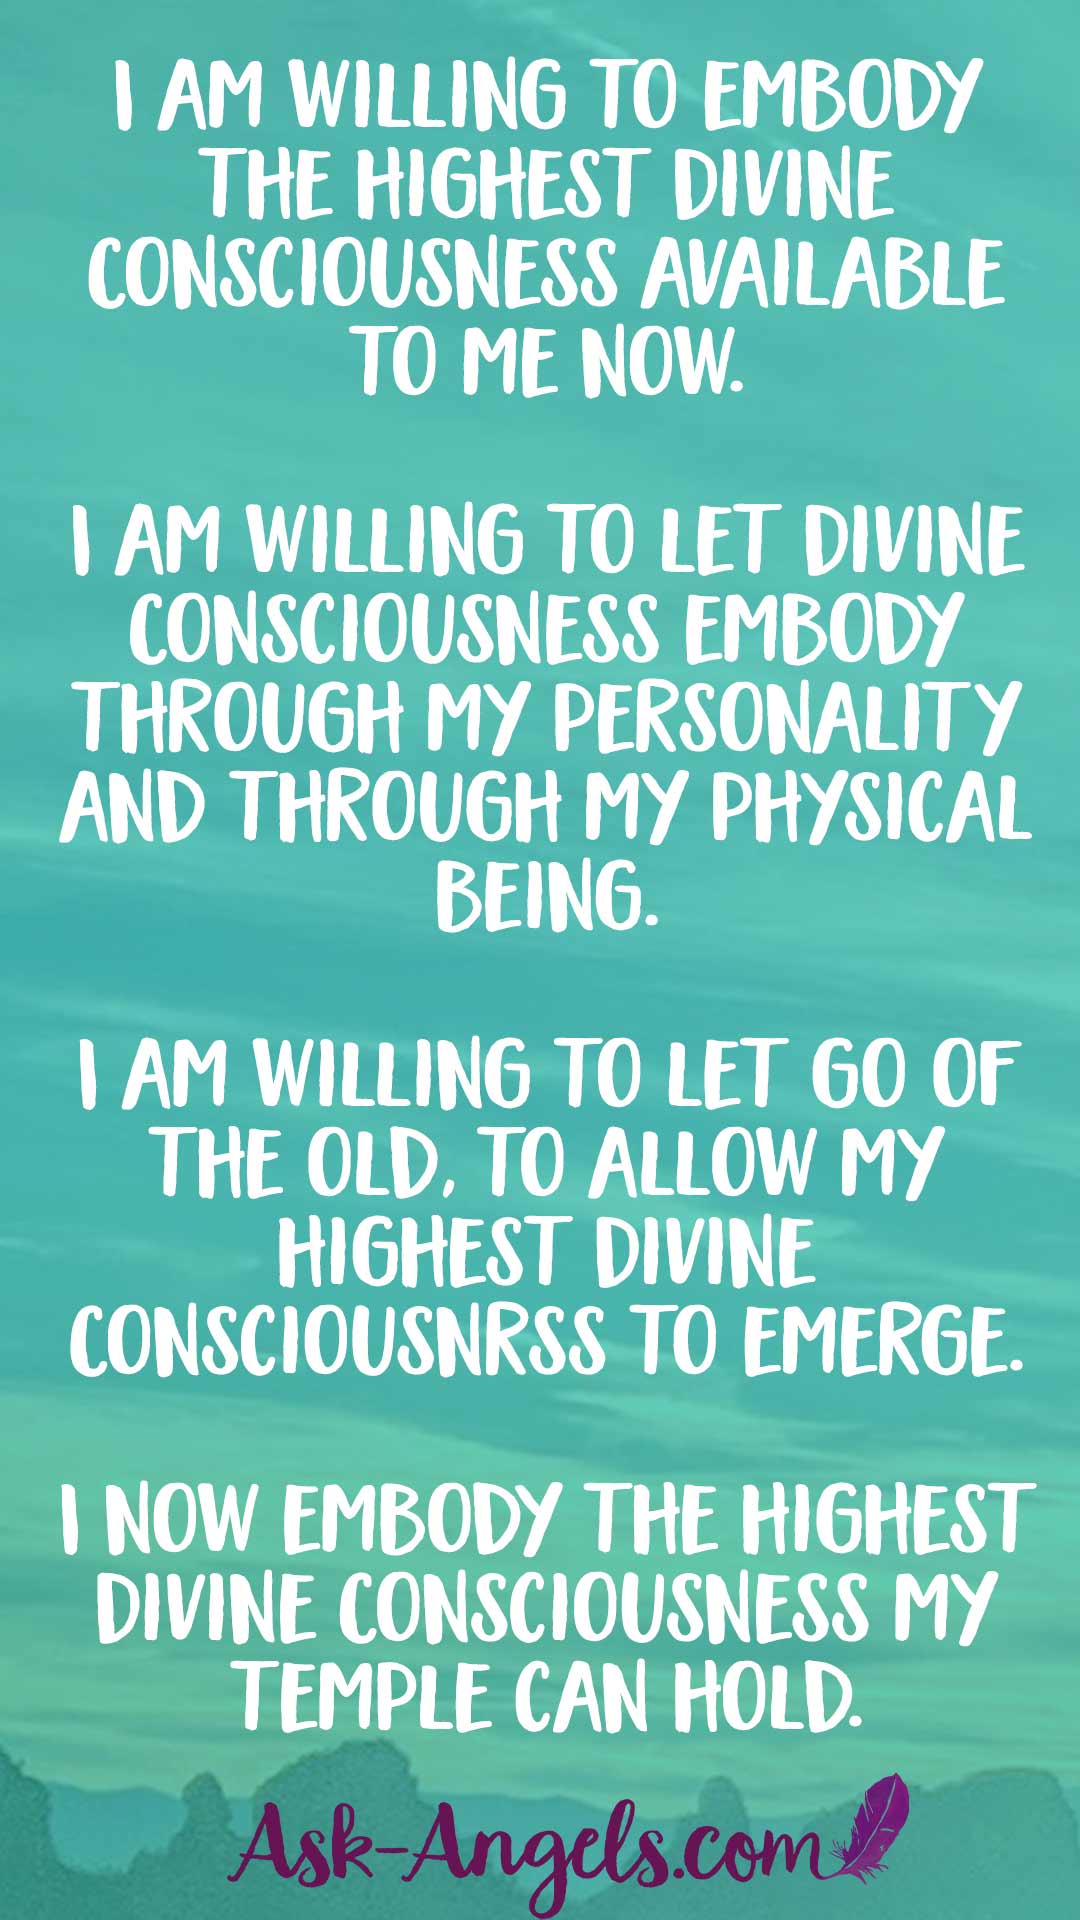 I am willing to embody the highest Divine Consciousness available to me now. I am willing to let Divine Consciousness embody through my personality and through my physical being. I am willing to let fo of the old, to allow my highest Divine Consicousnss to emerge. I now embody the highest Divine Consciousness my temple can hold.